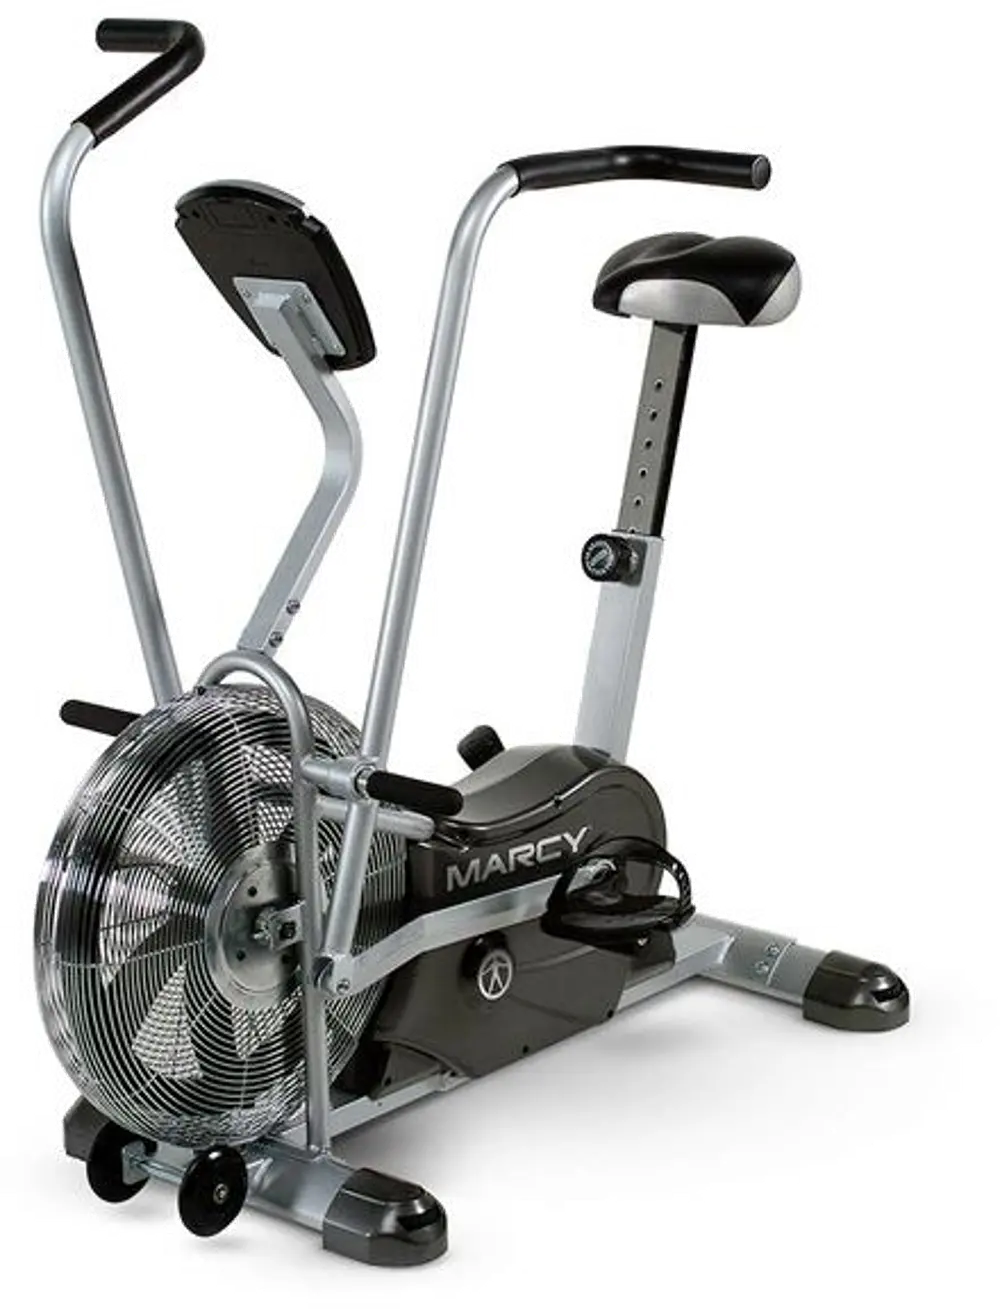 AIR-1 Marcy Deluxe Fan Stationary Bike-1